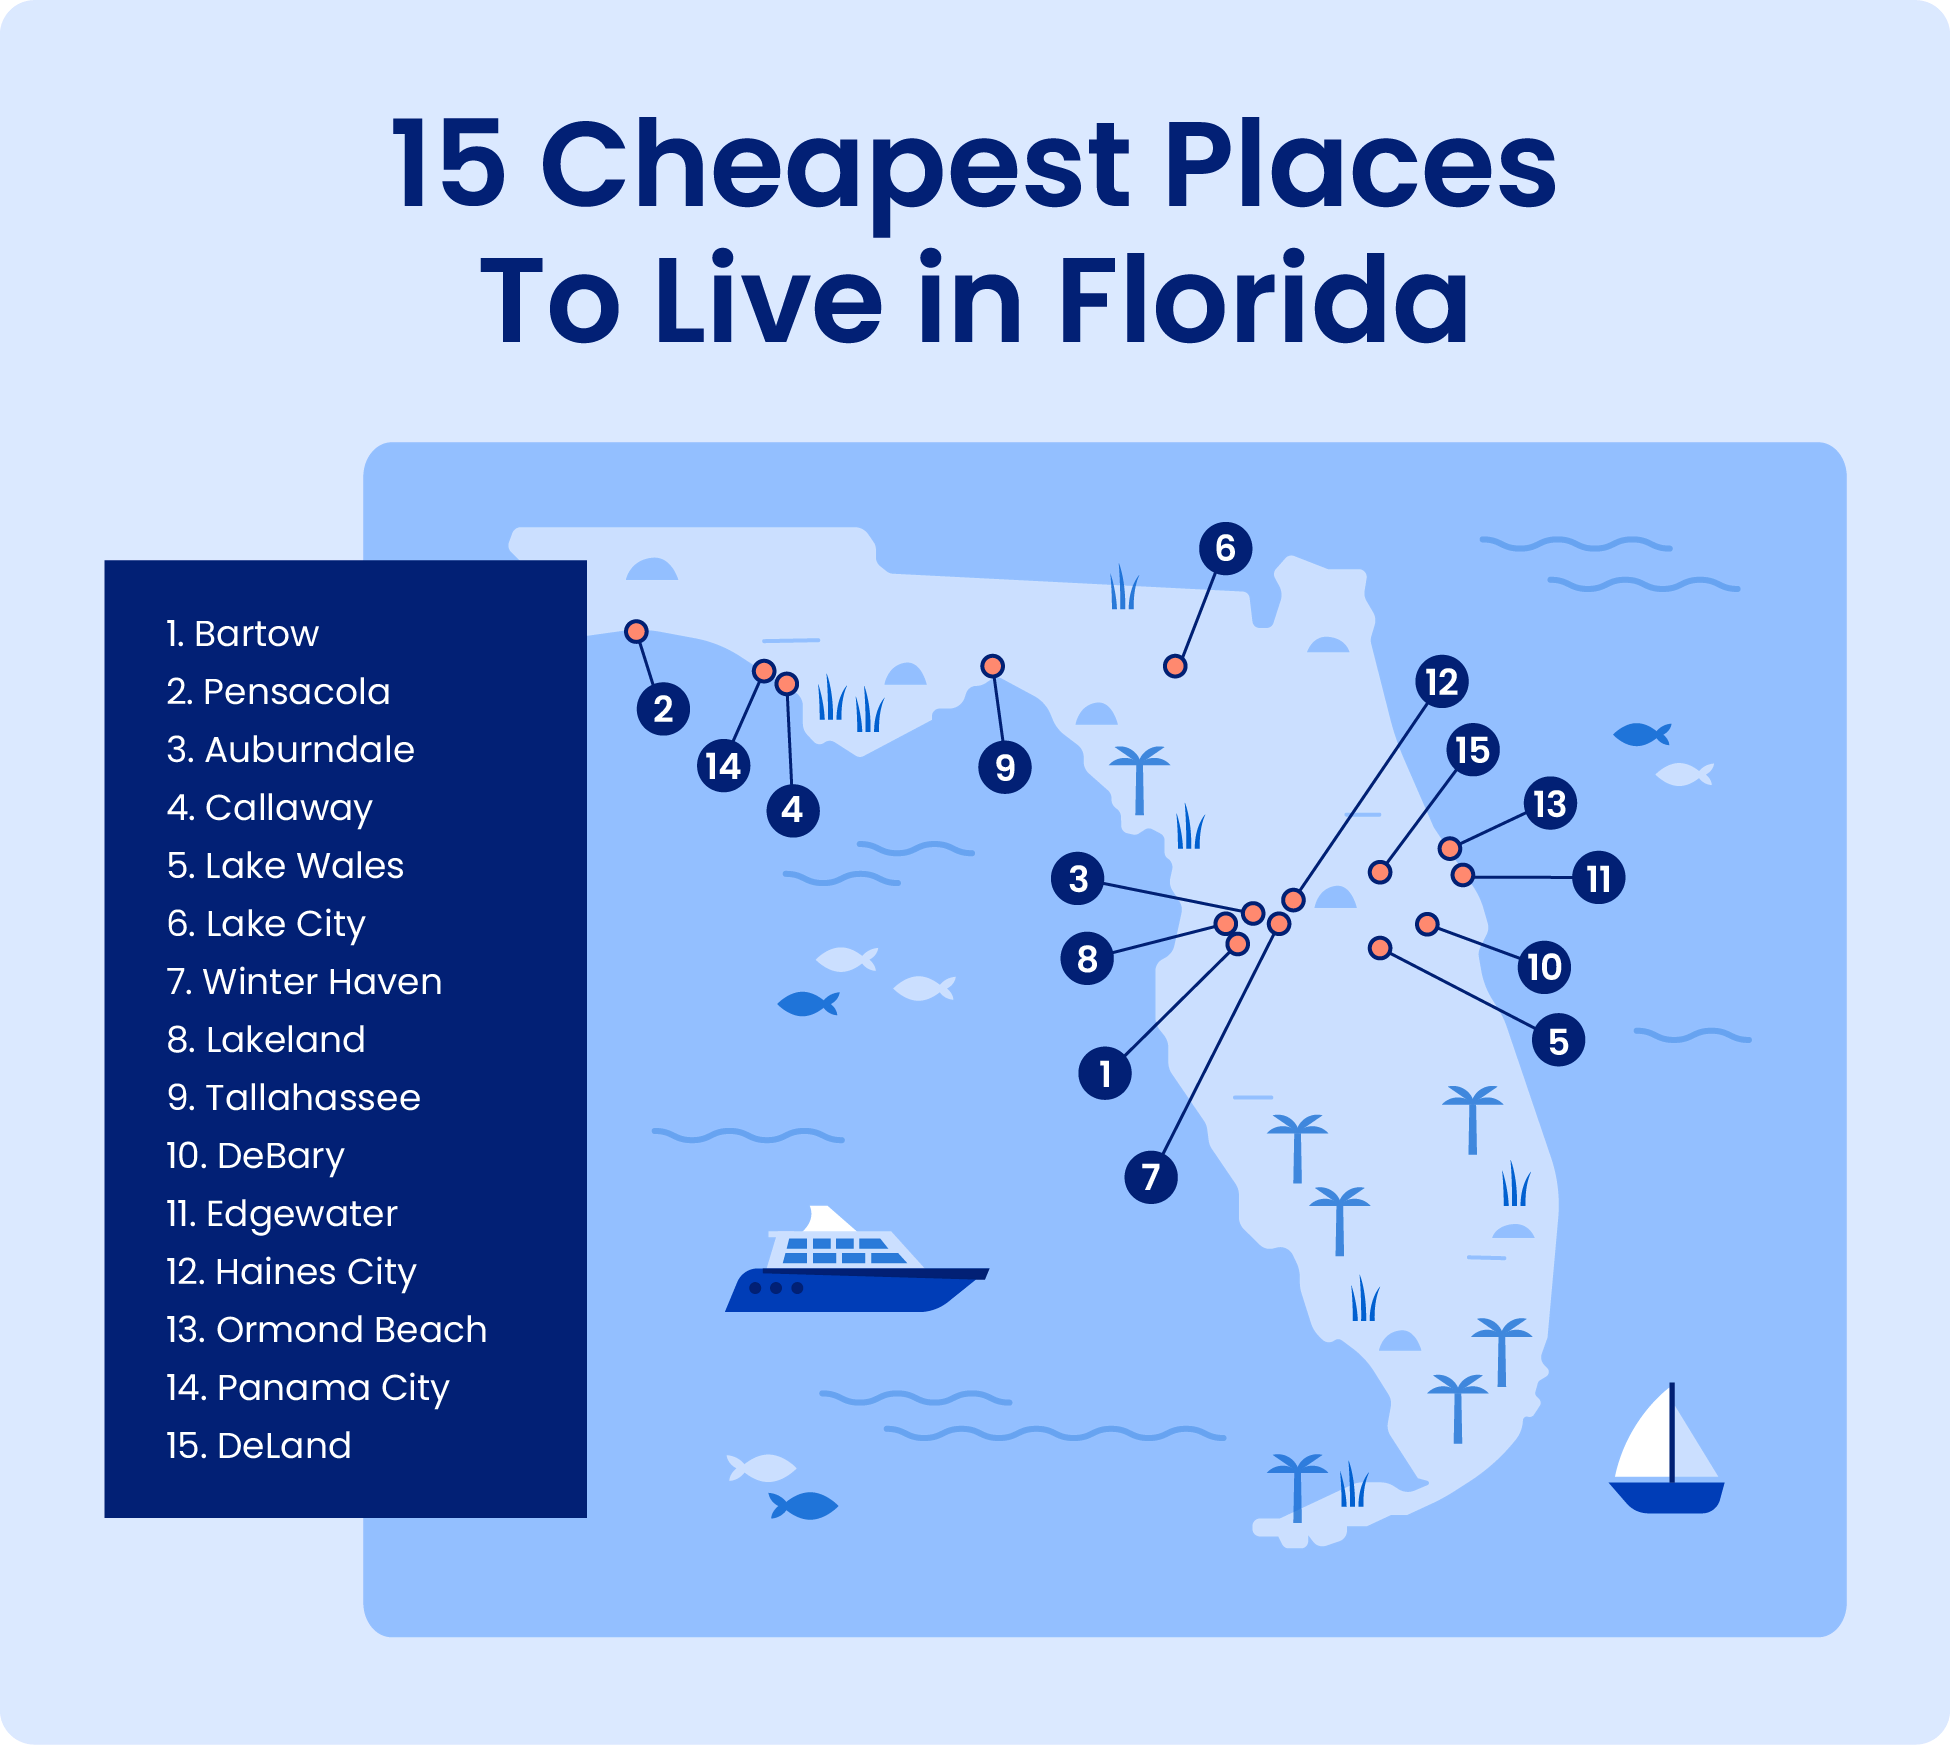 Map of the cheapest places to live in Florida.